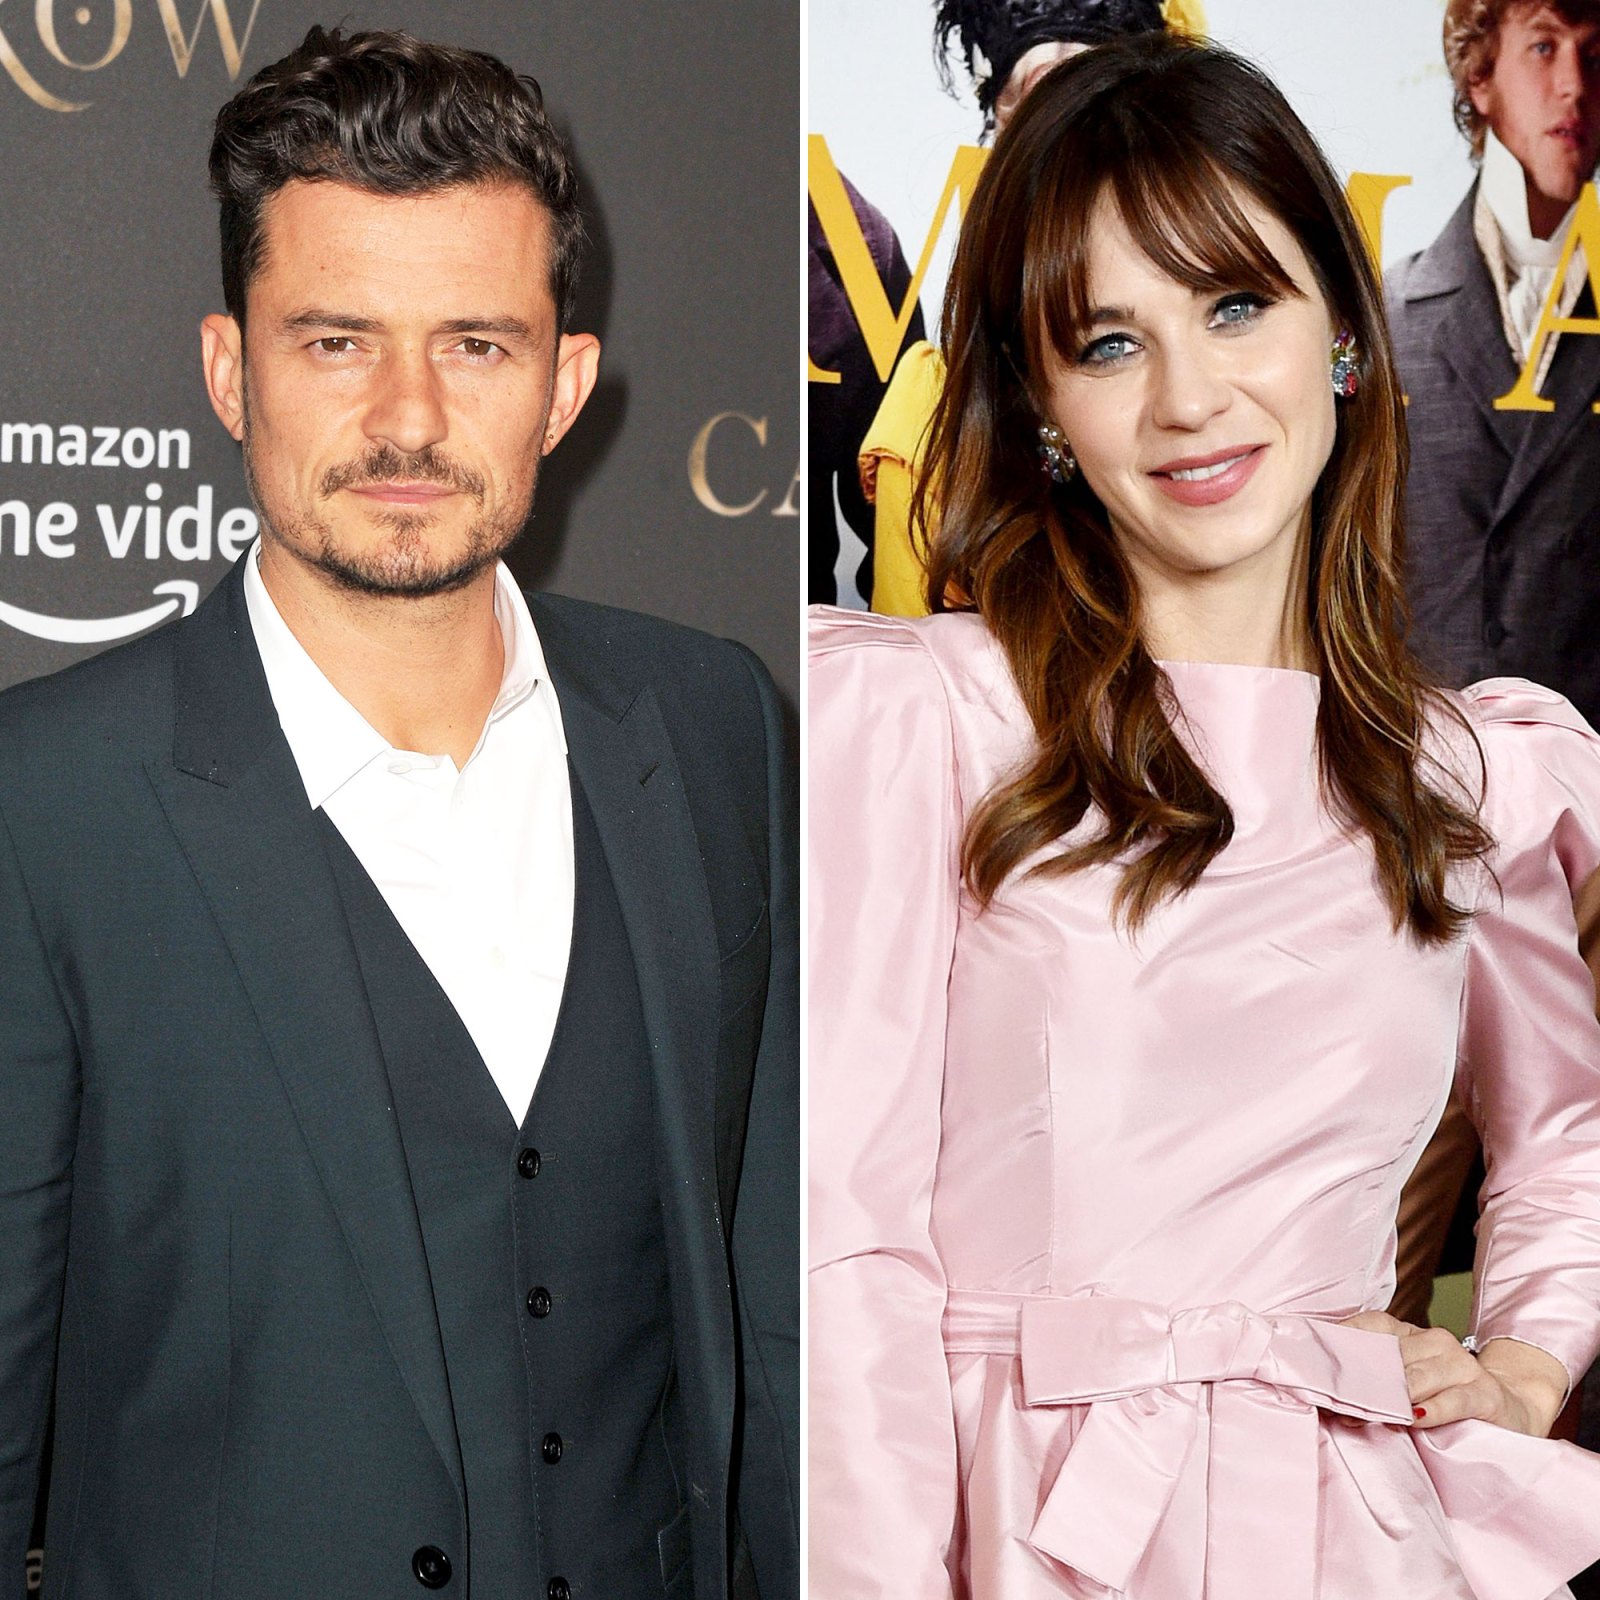 Orlando Bloom and Zooey Deschanel Stars Who Use Their Influence to Give Back